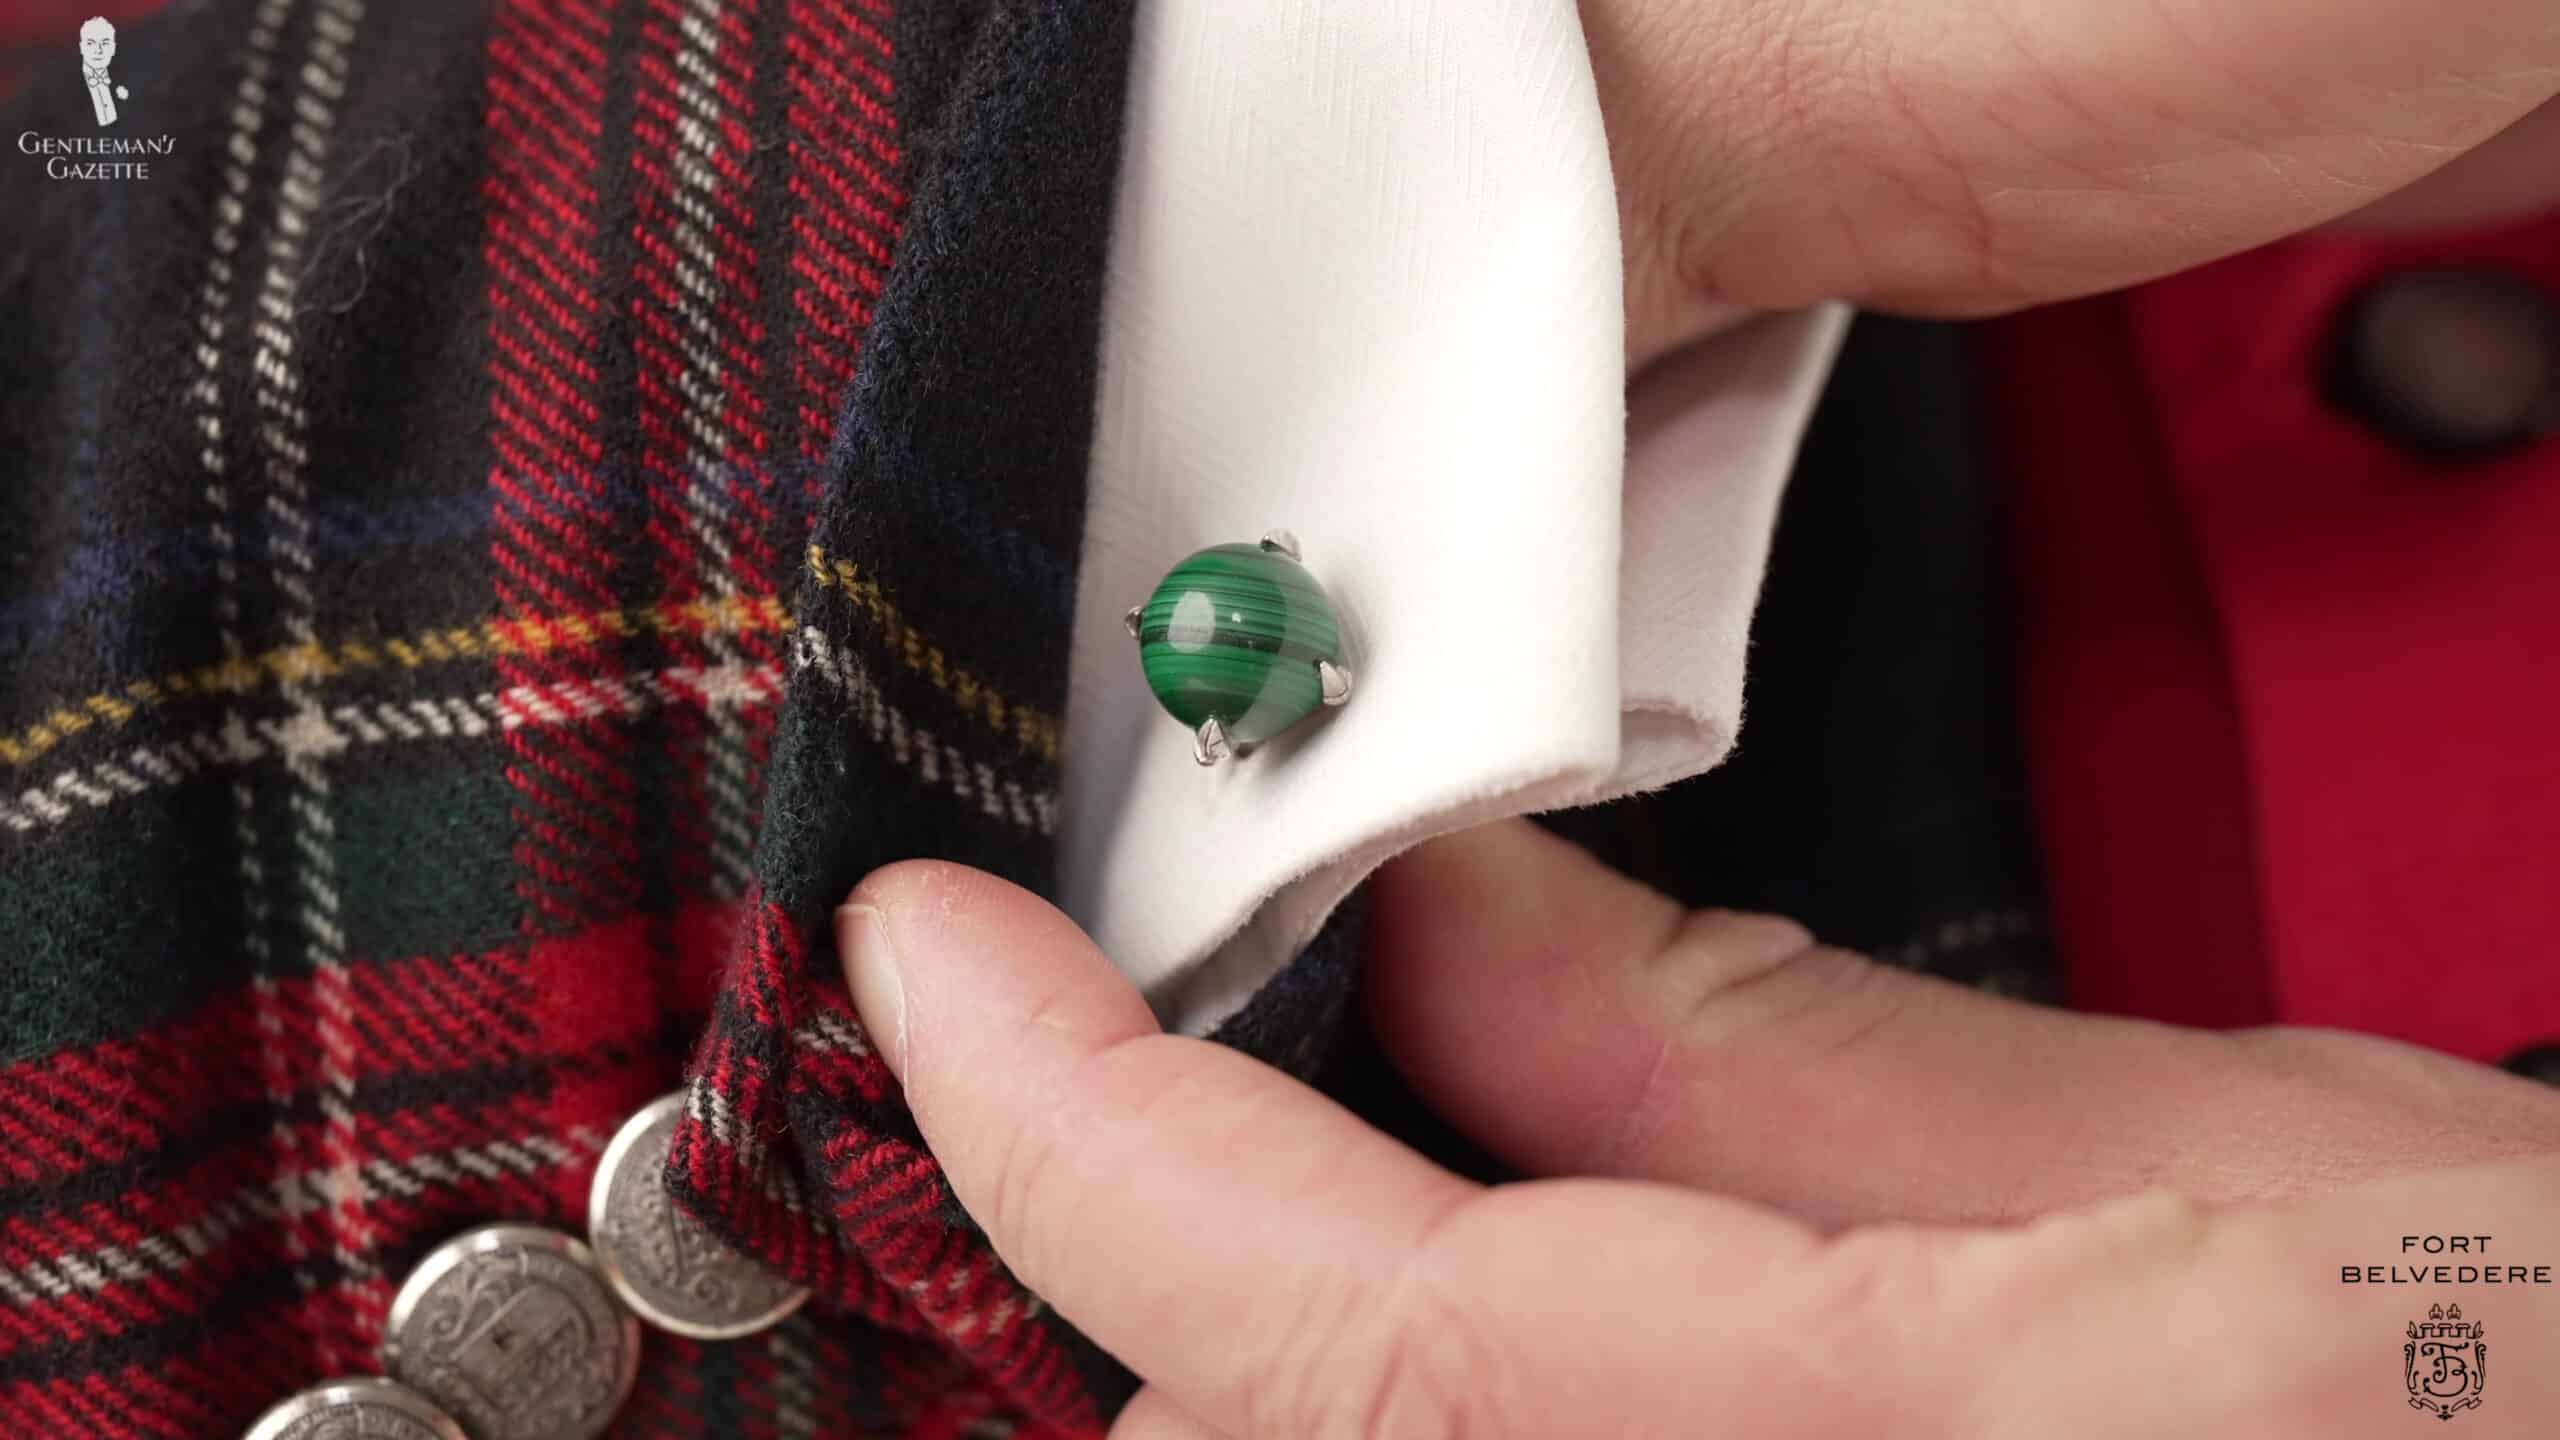 Raphael's silver and malachite cufflinks and green pinky ring pick up on the Christmas theme.